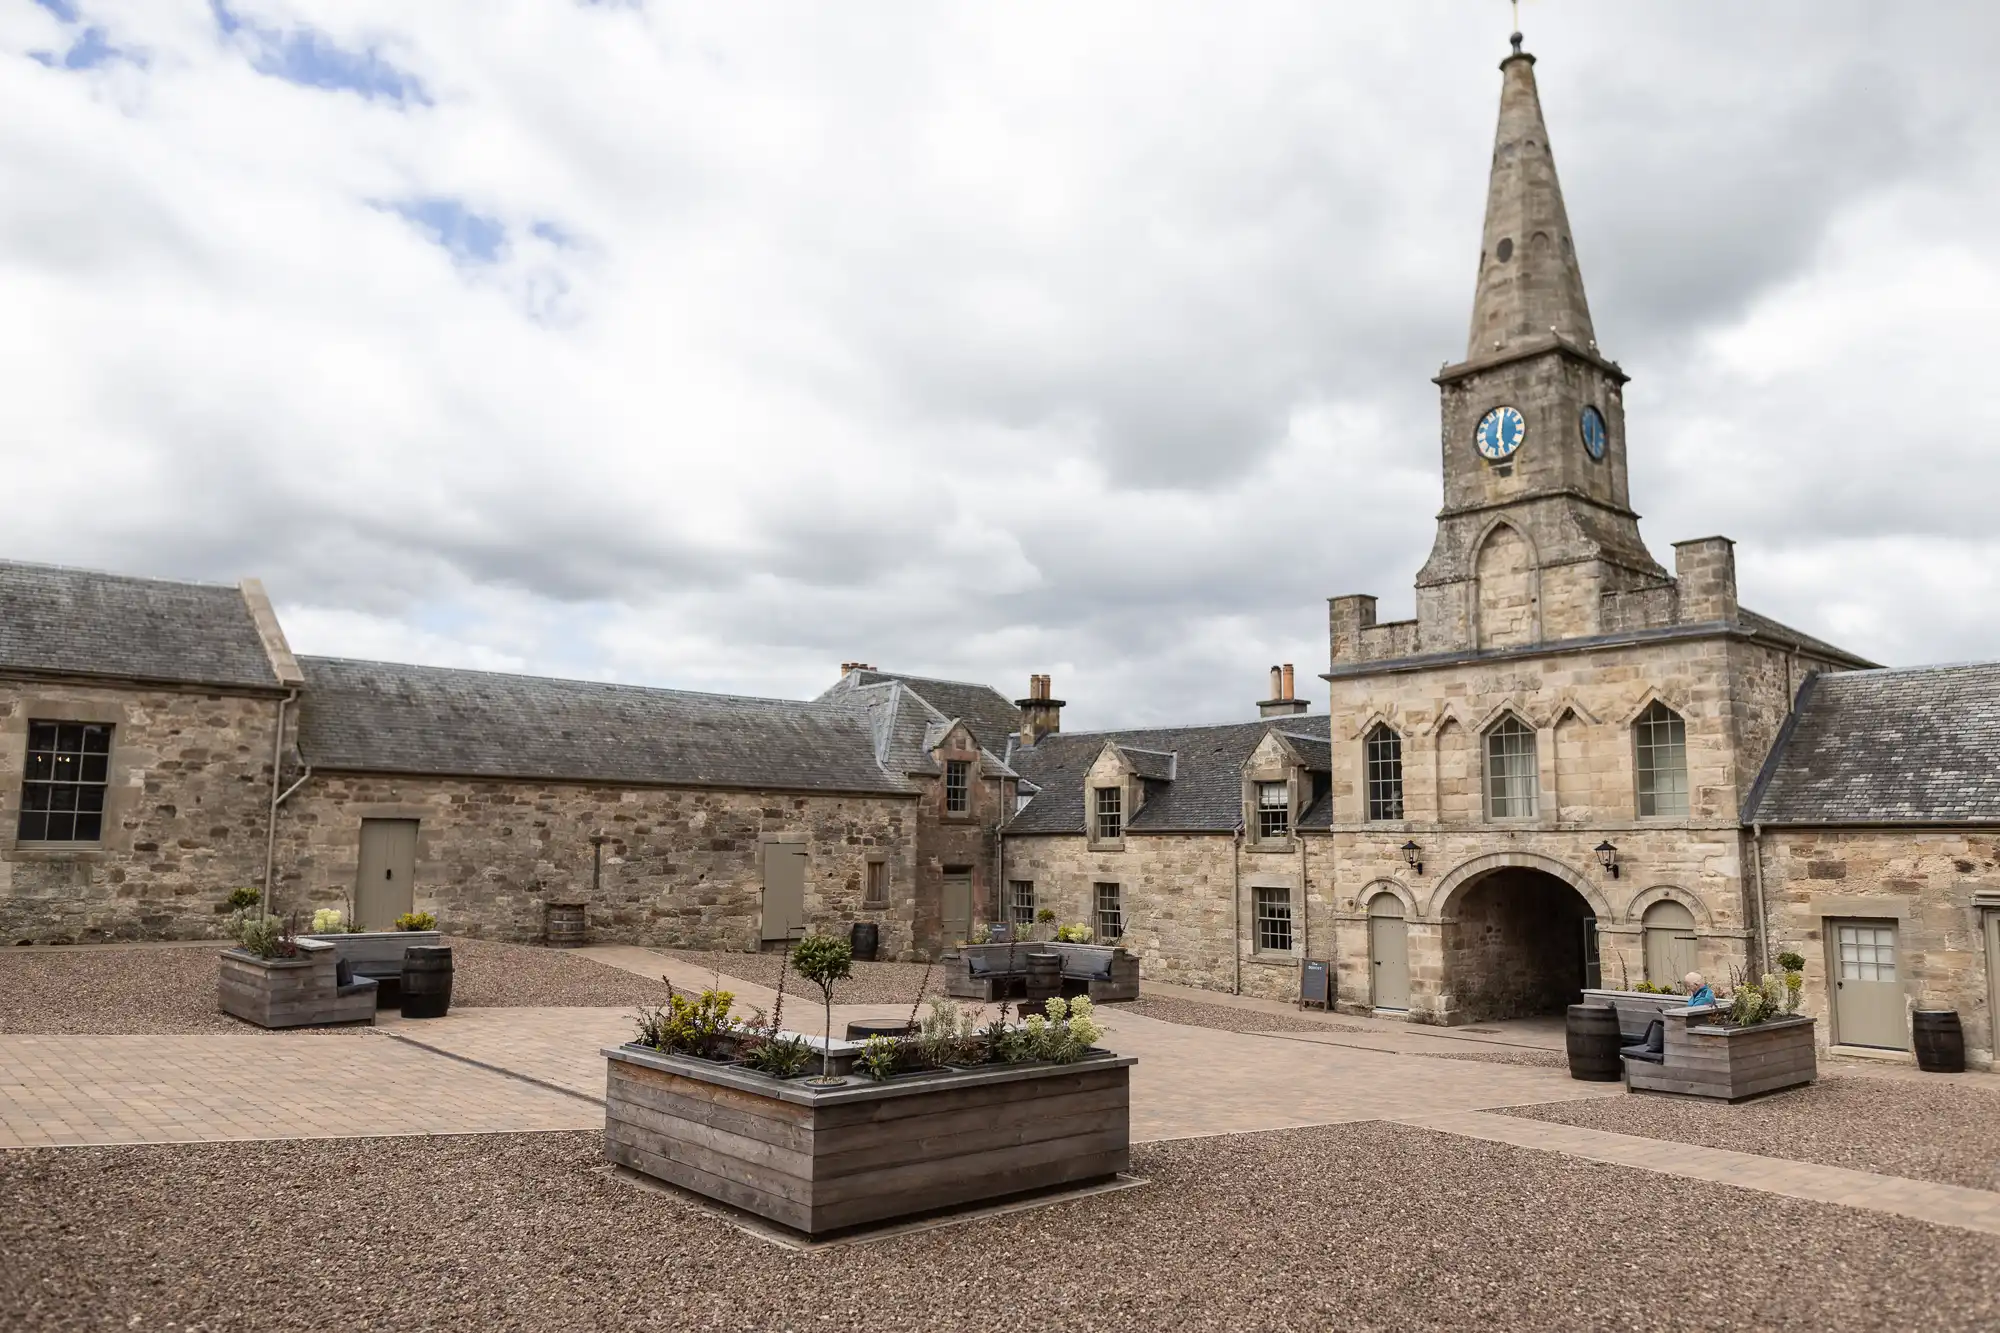 Rosebery Steading courtyard with a central clock tower, surrounded by stone buildings and several large planters with greenery under a cloudy sky.